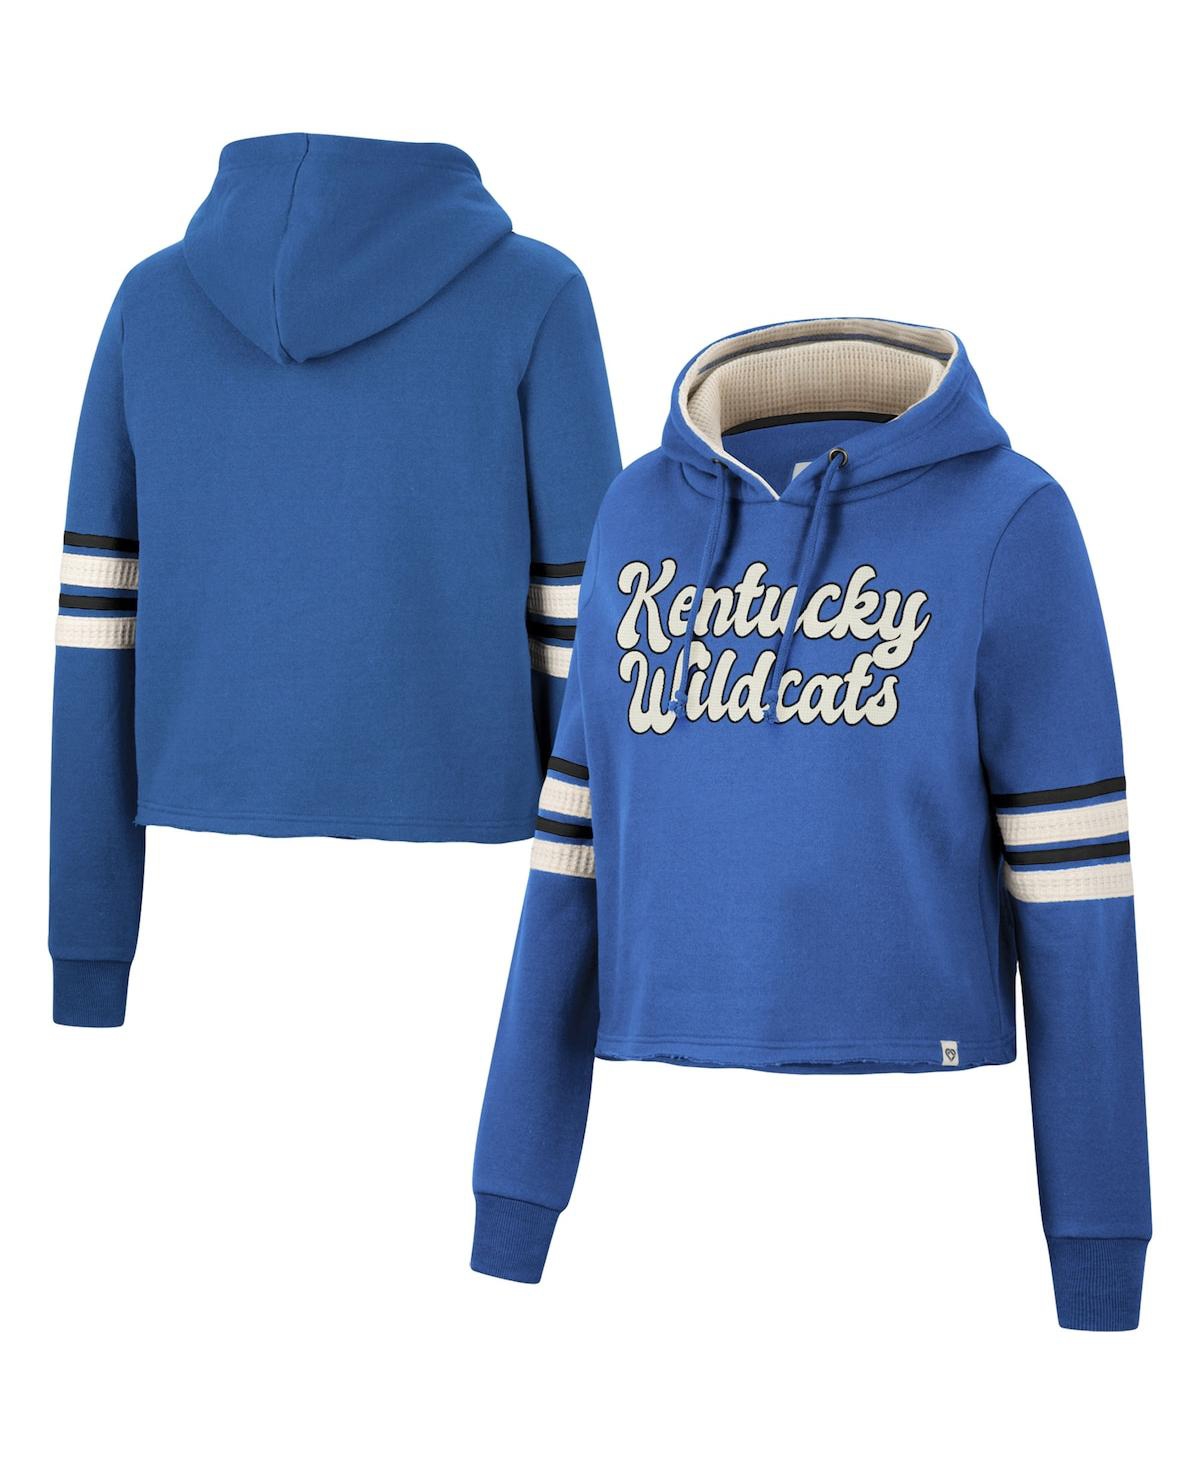 Women's Colosseum Royal Kentucky Wildcats Retro Cropped Pullover Hoodie - Royal